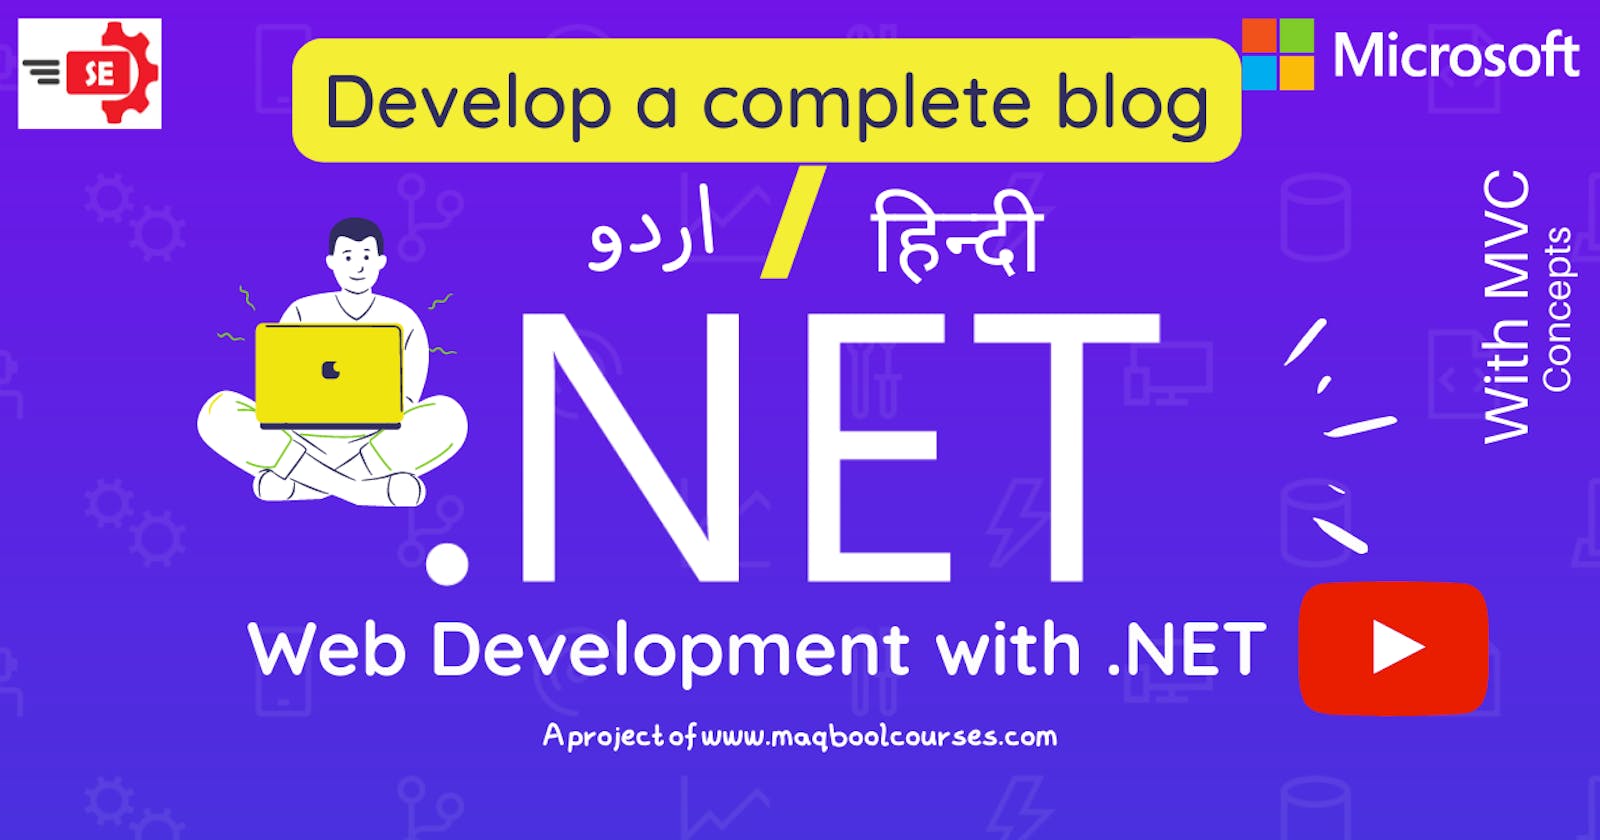 Learn how to develop a blog with C#.NET MVC